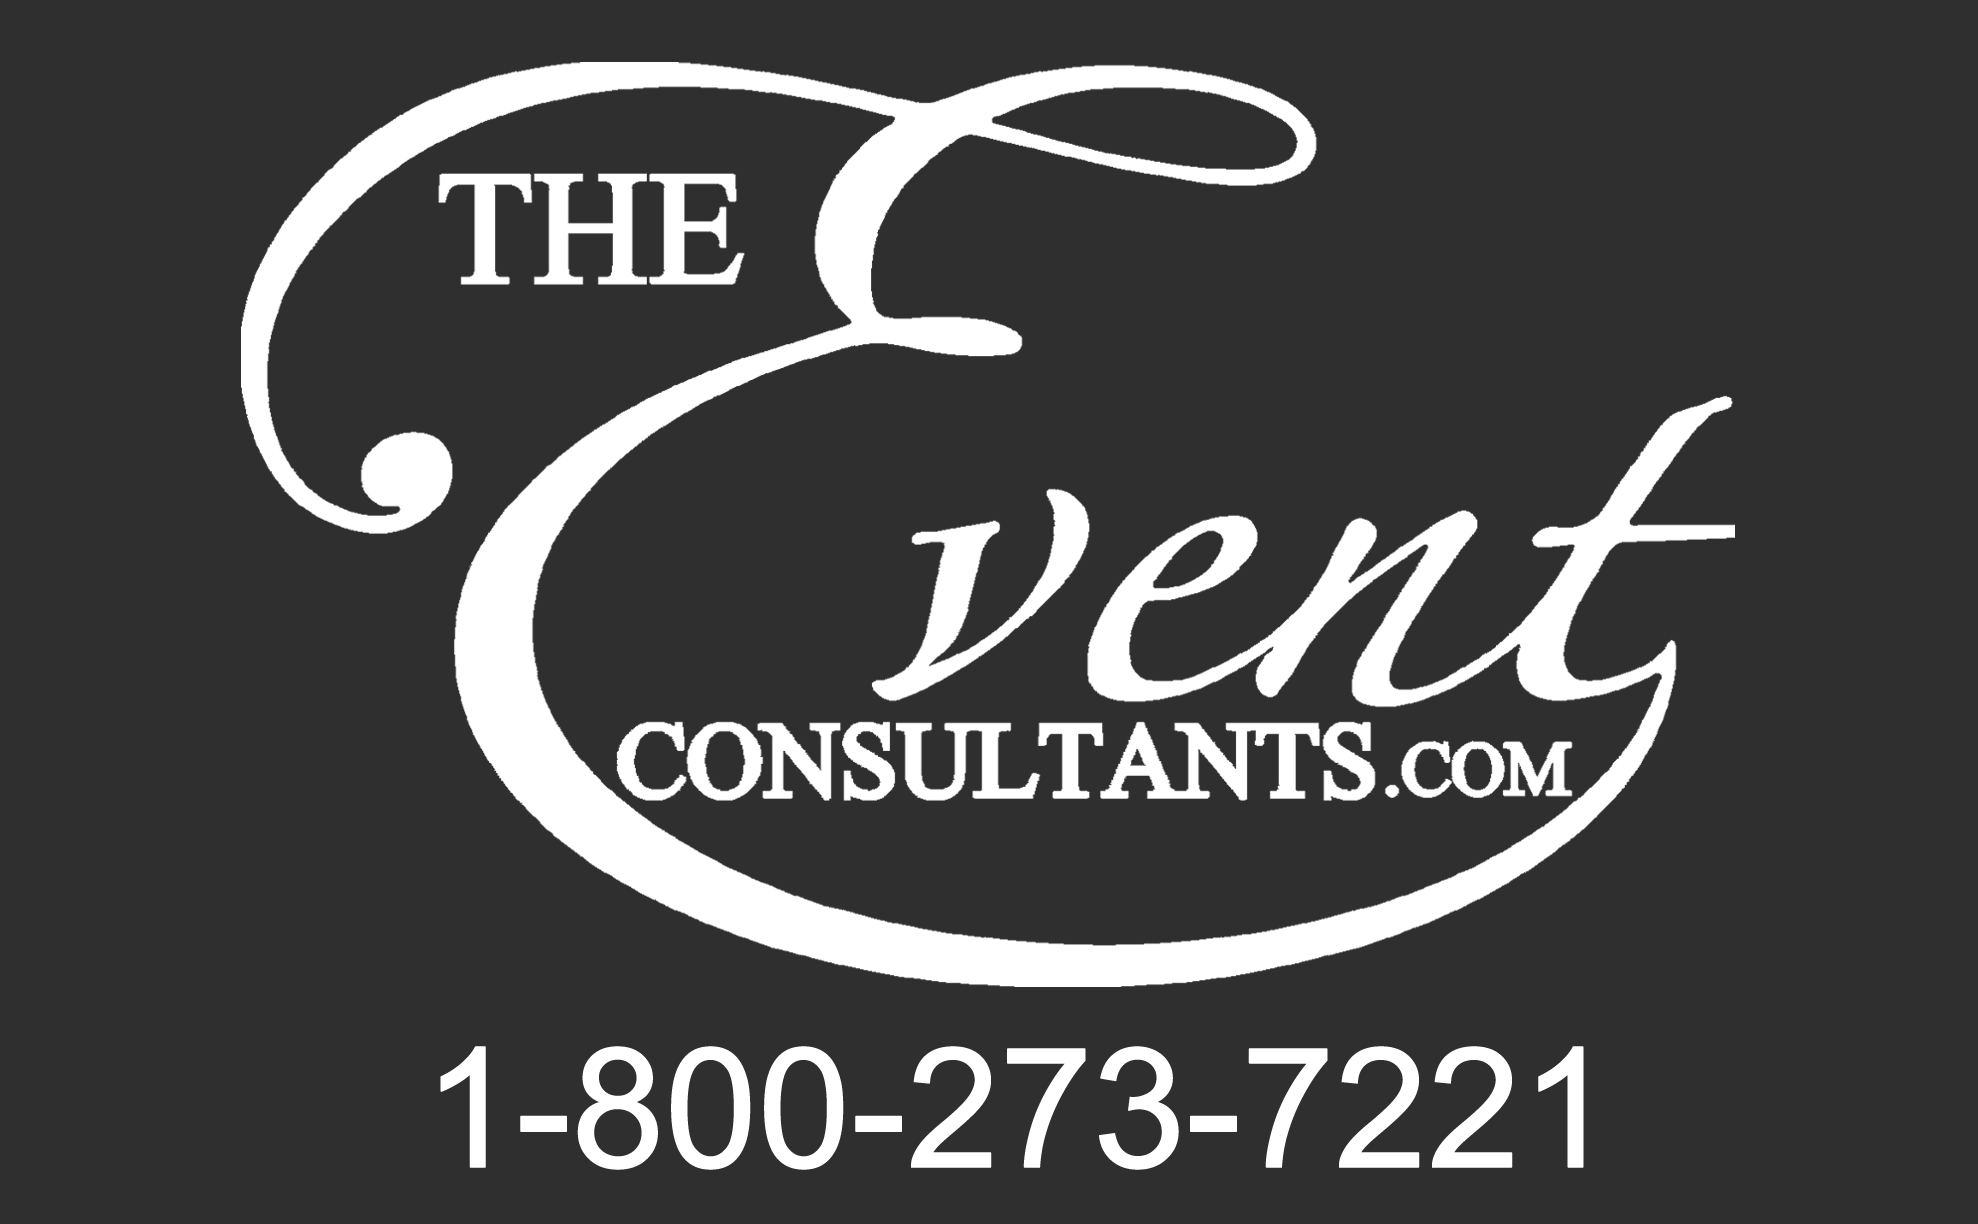 The Event Consultants